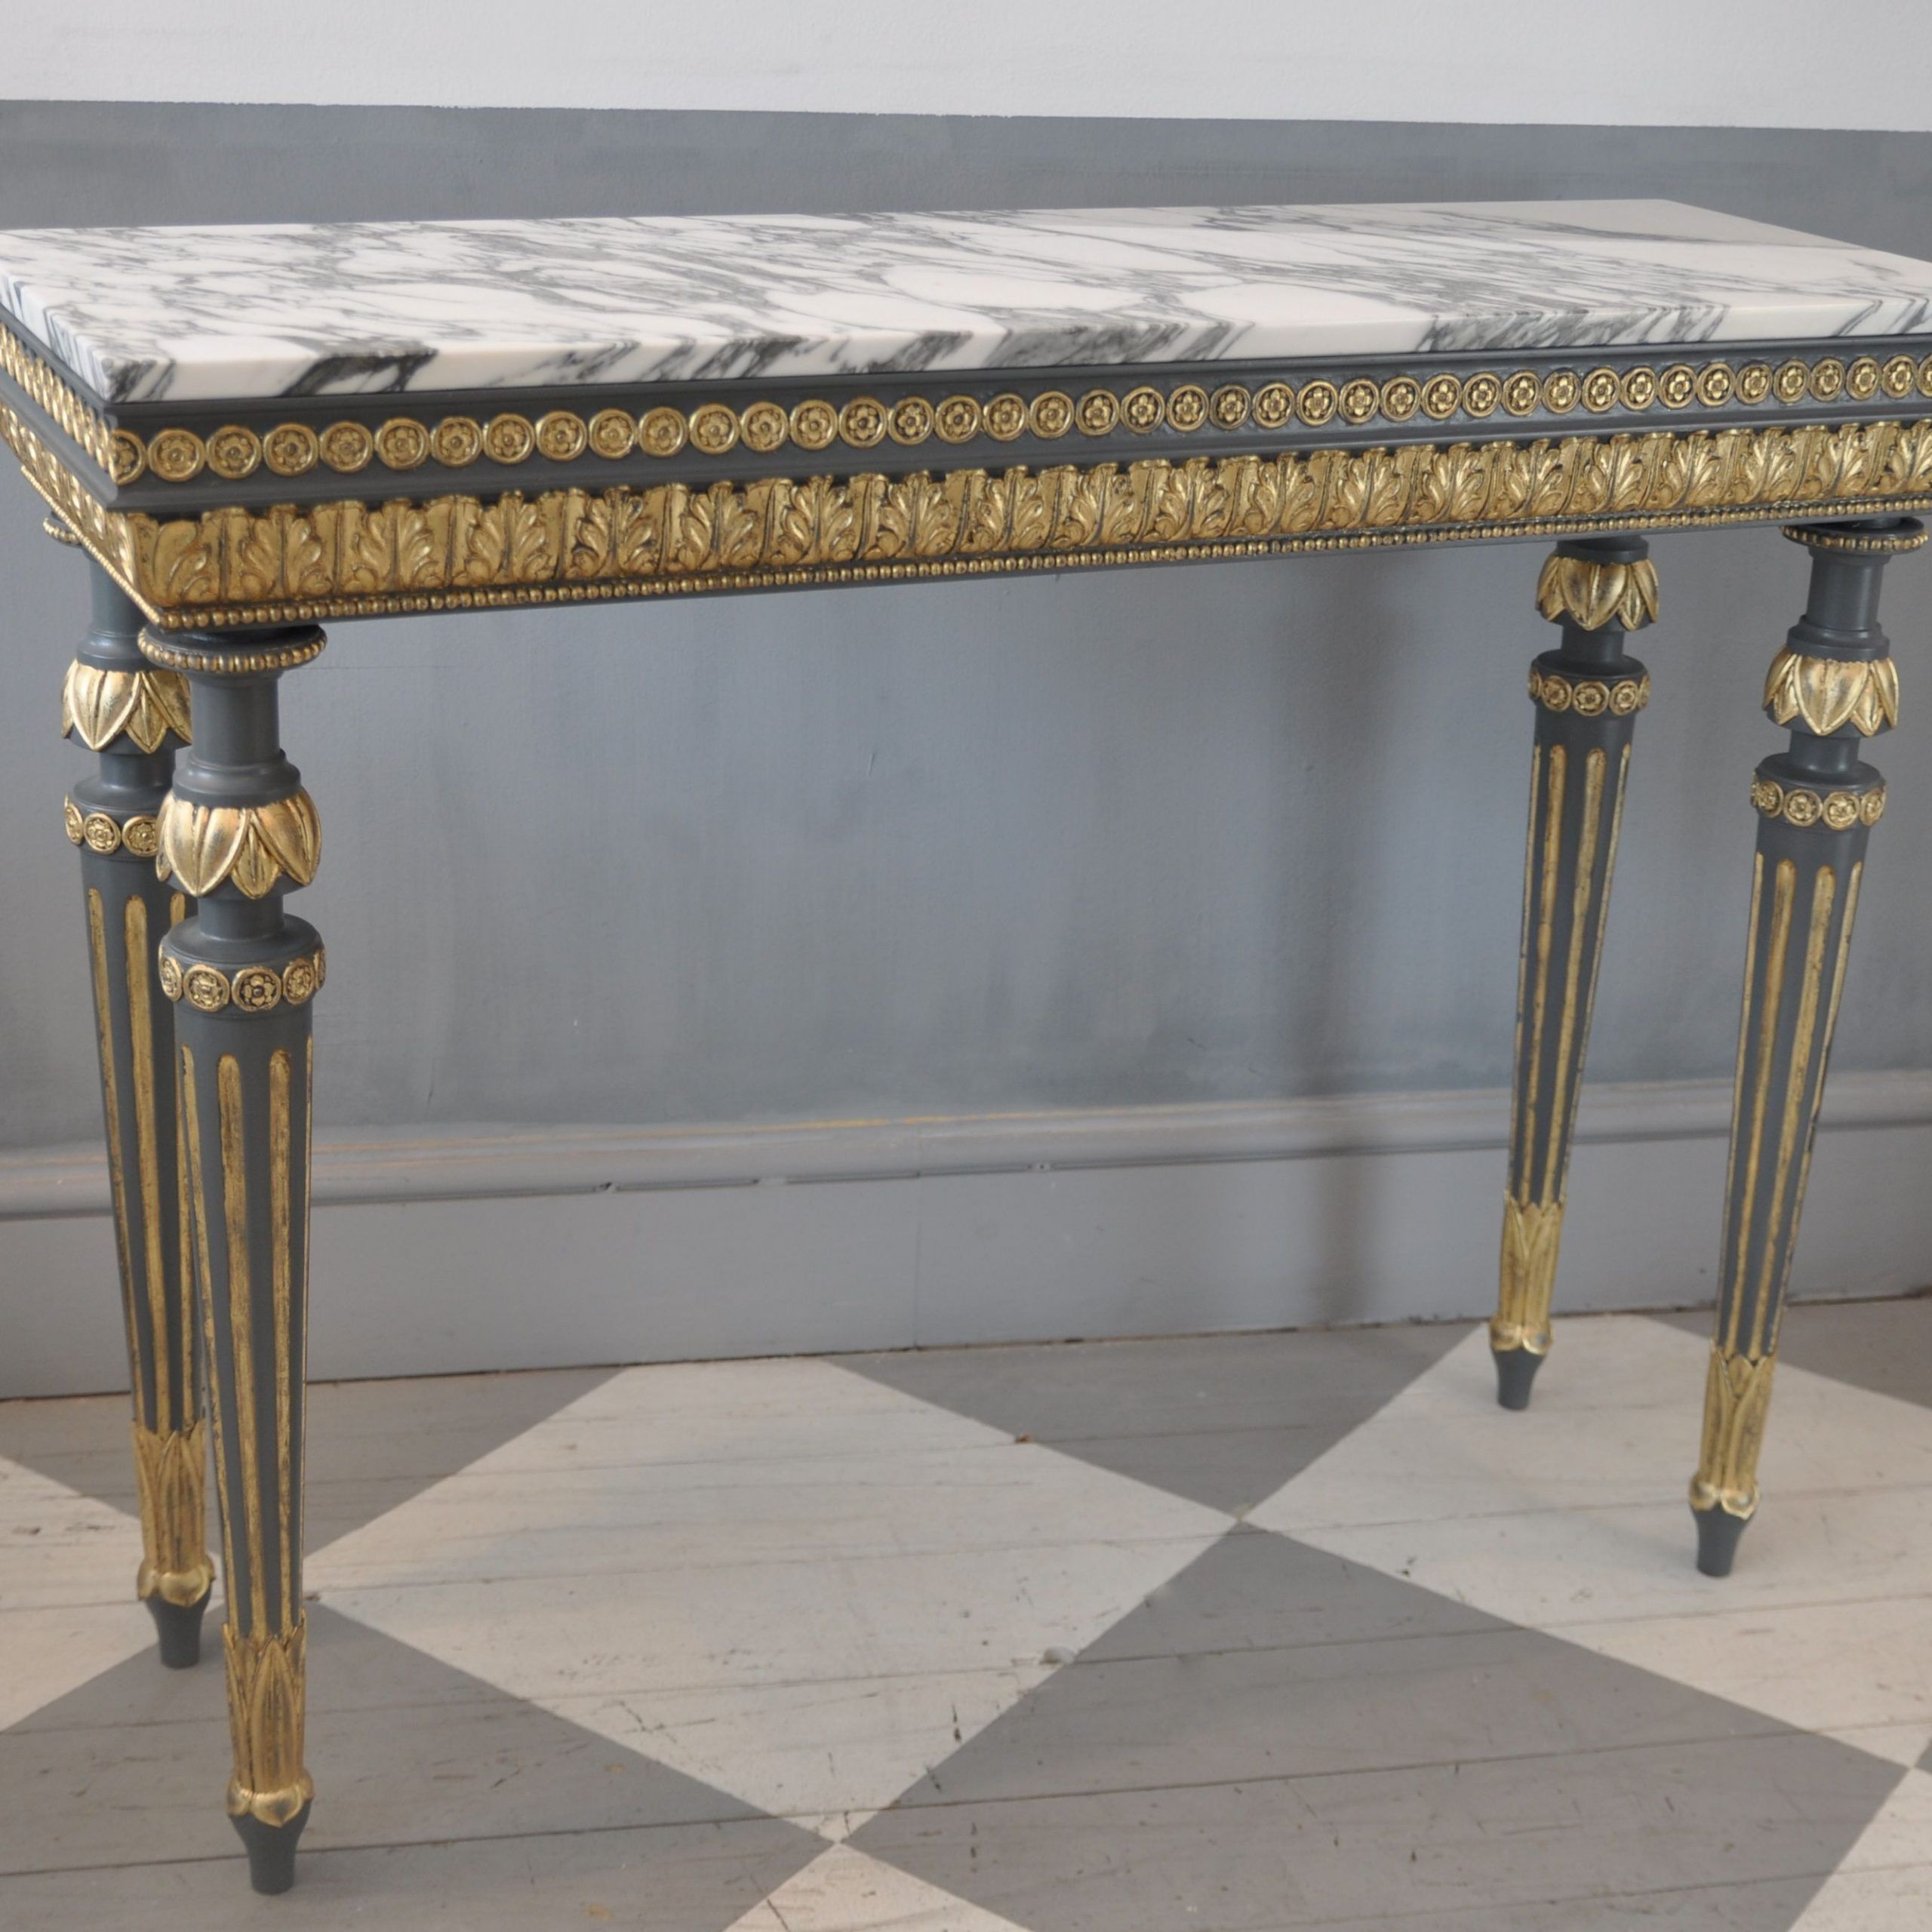 Gold Gilded Console Table With Marble Top | Swedish Furniture Throughout Marble Top Console Tables (View 6 of 20)